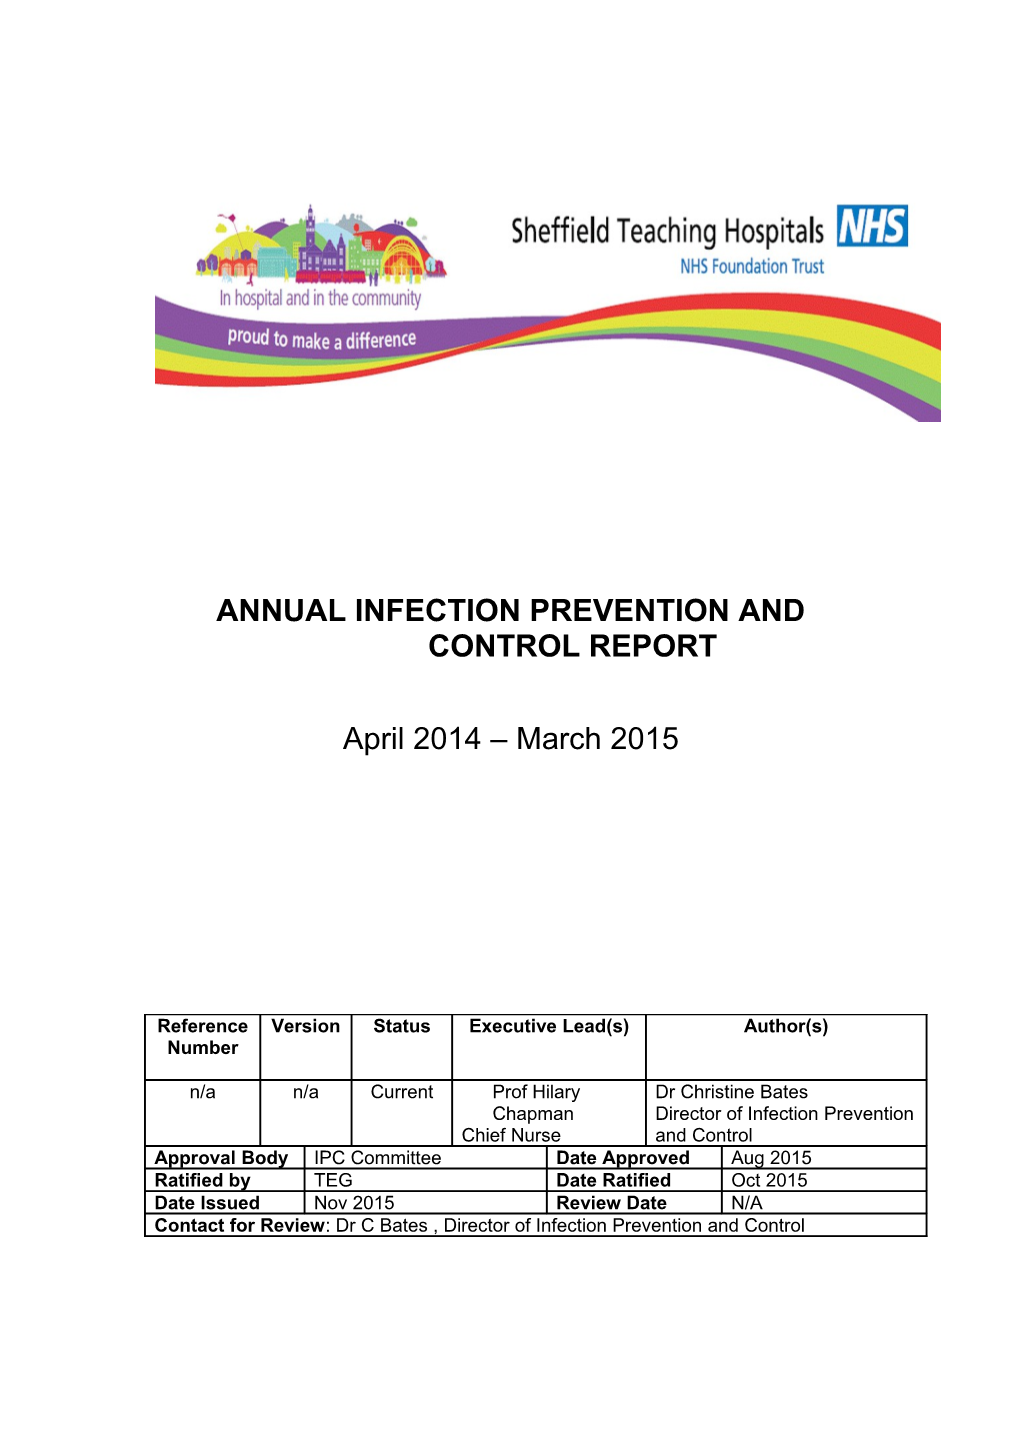 Annual Infection Prevention and Control Report